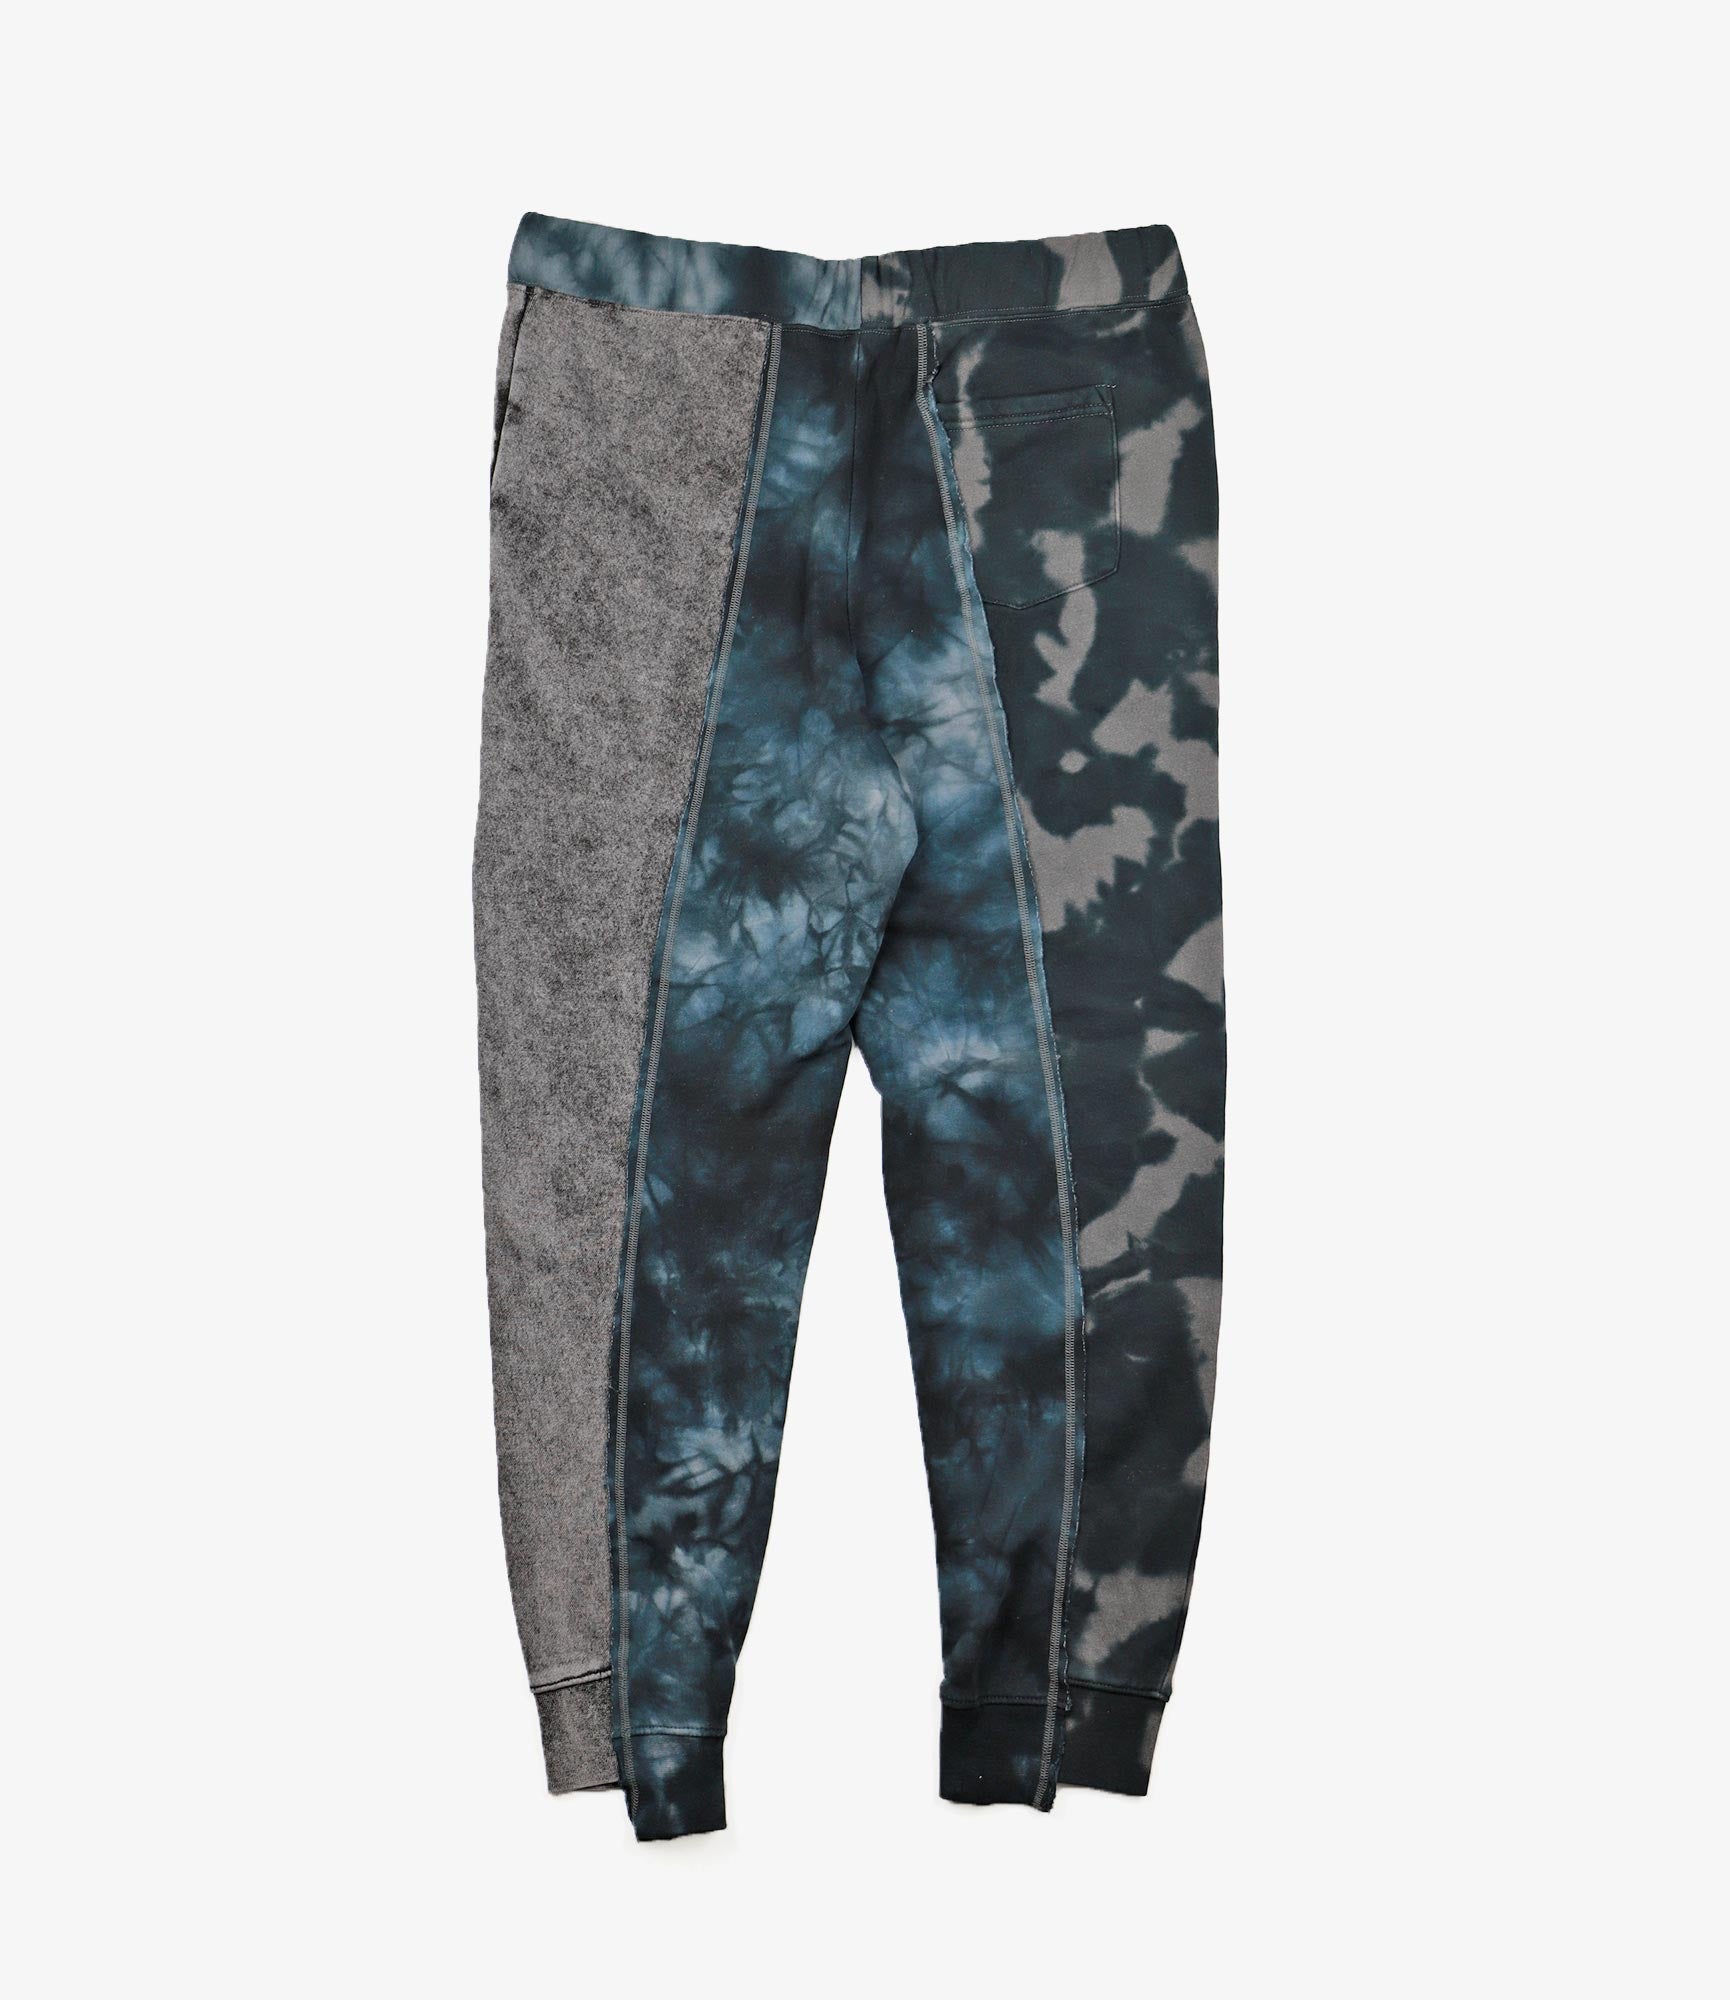 Nepenthes Special Rebuild Sweat Pant - Mishmash